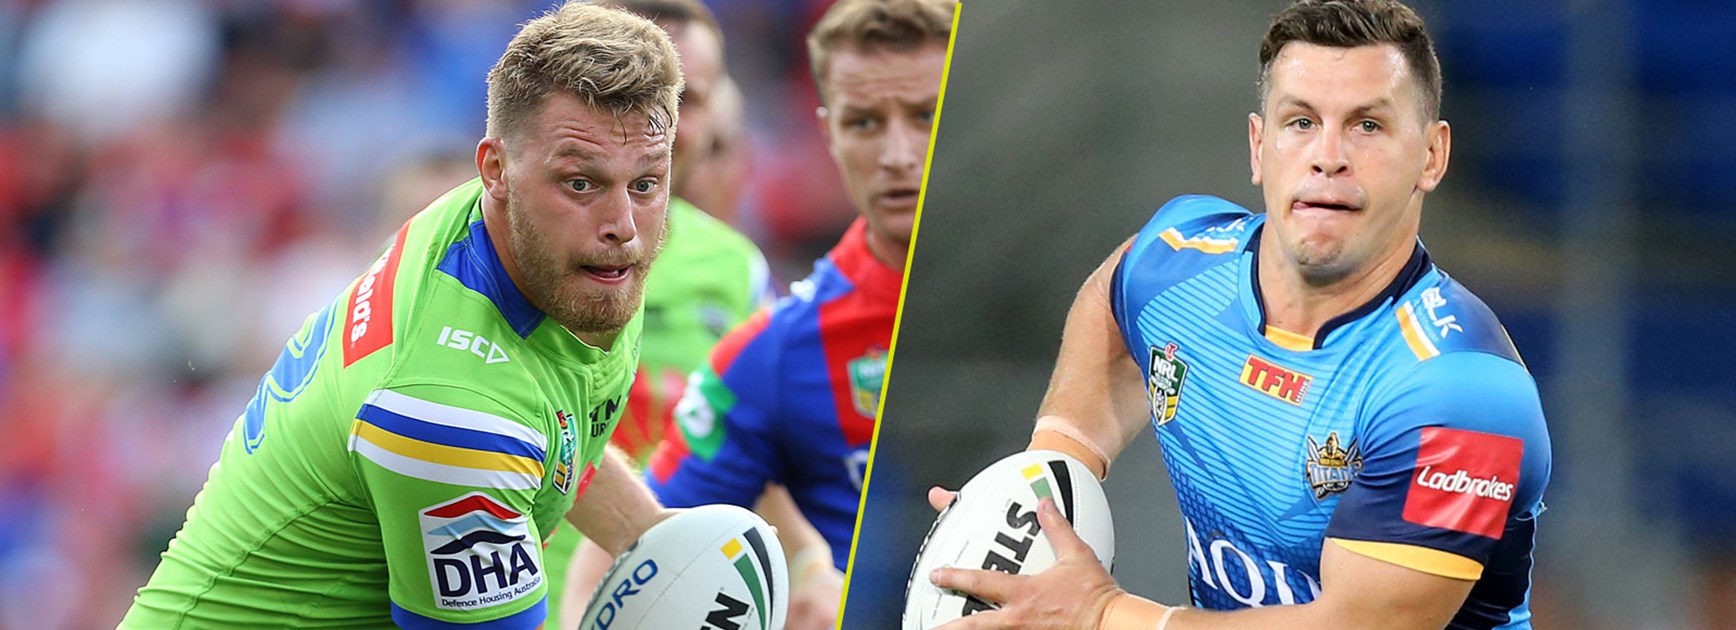 Raiders stand-in five-eighth and Titans lock Greg Bird will clash in Round 4.